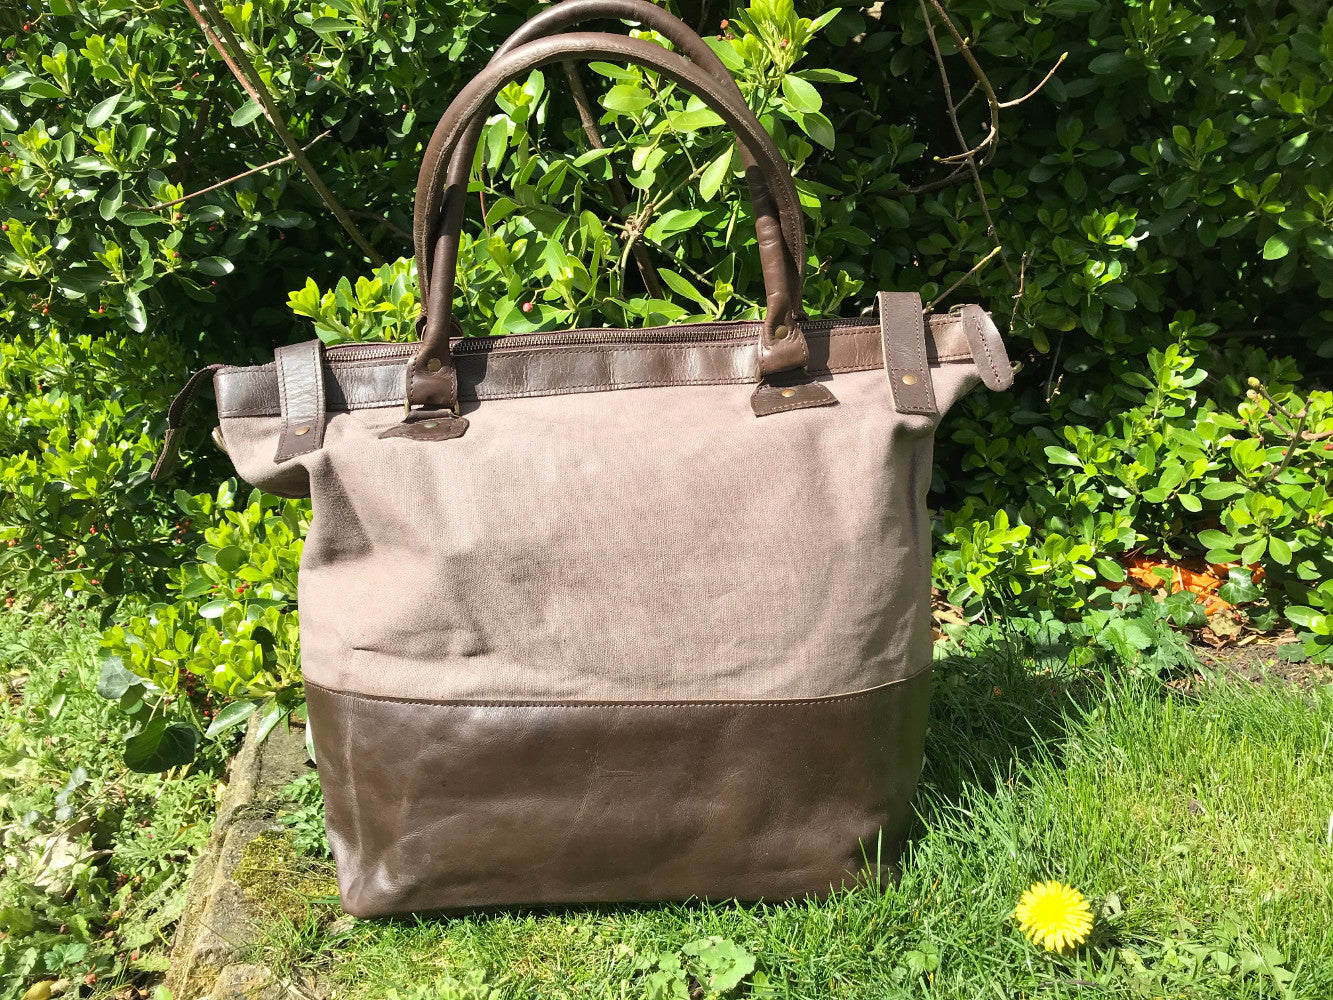 The Bingham.  A classic zipped tote bag by Burghley Bags.  Handmade from eco-friendly vegetable tanned leather and strong cotton canvas, with a leather shoulder strap.  Shown in soft grey.